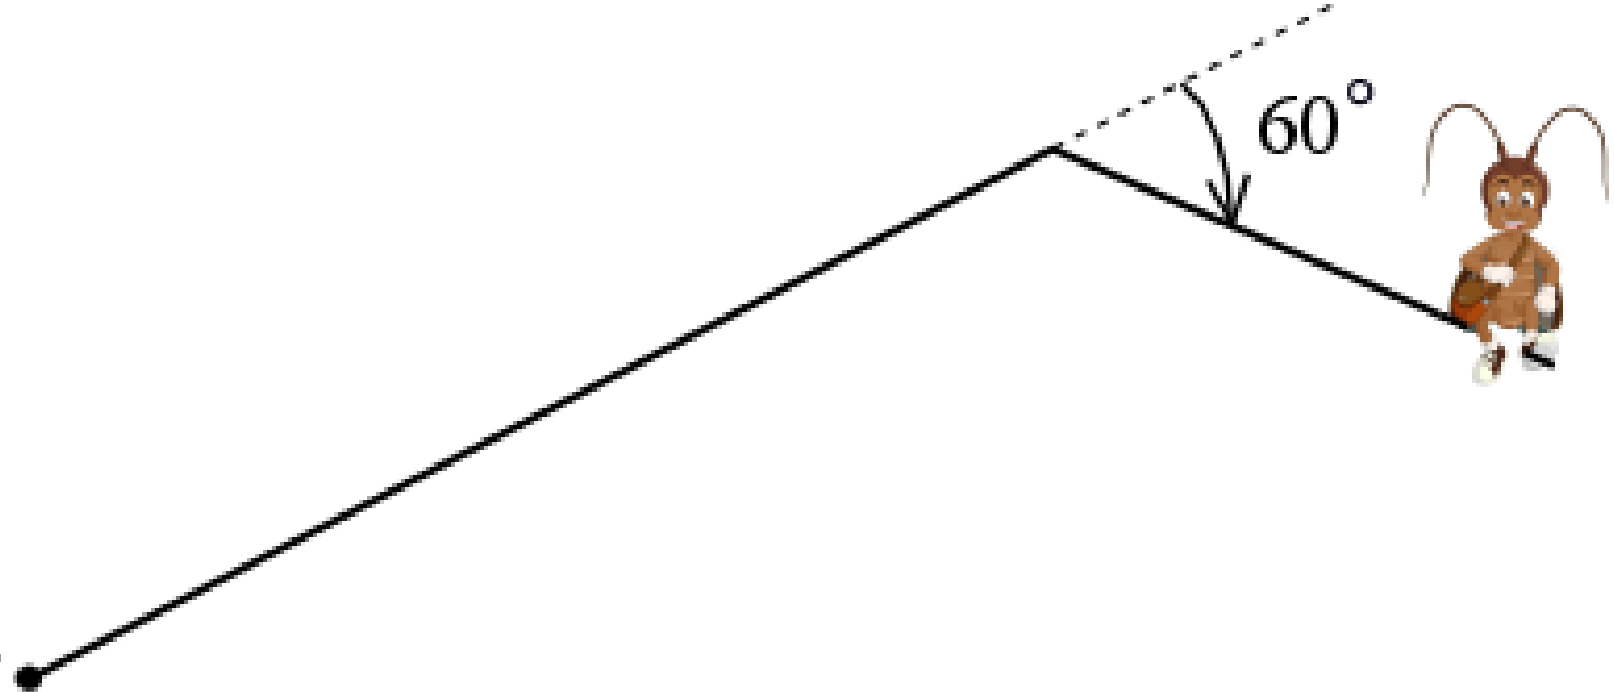 A line segment directed up and to the right begins as a solid line then changes to a dotted line. At the point where the line changes, another shorter line segment extends down and to the right. A rounded arrow points from the dotted line to the shorter line segment with a 60 degree angle marked between them. A sprite sits on the end of this shorter line segment.